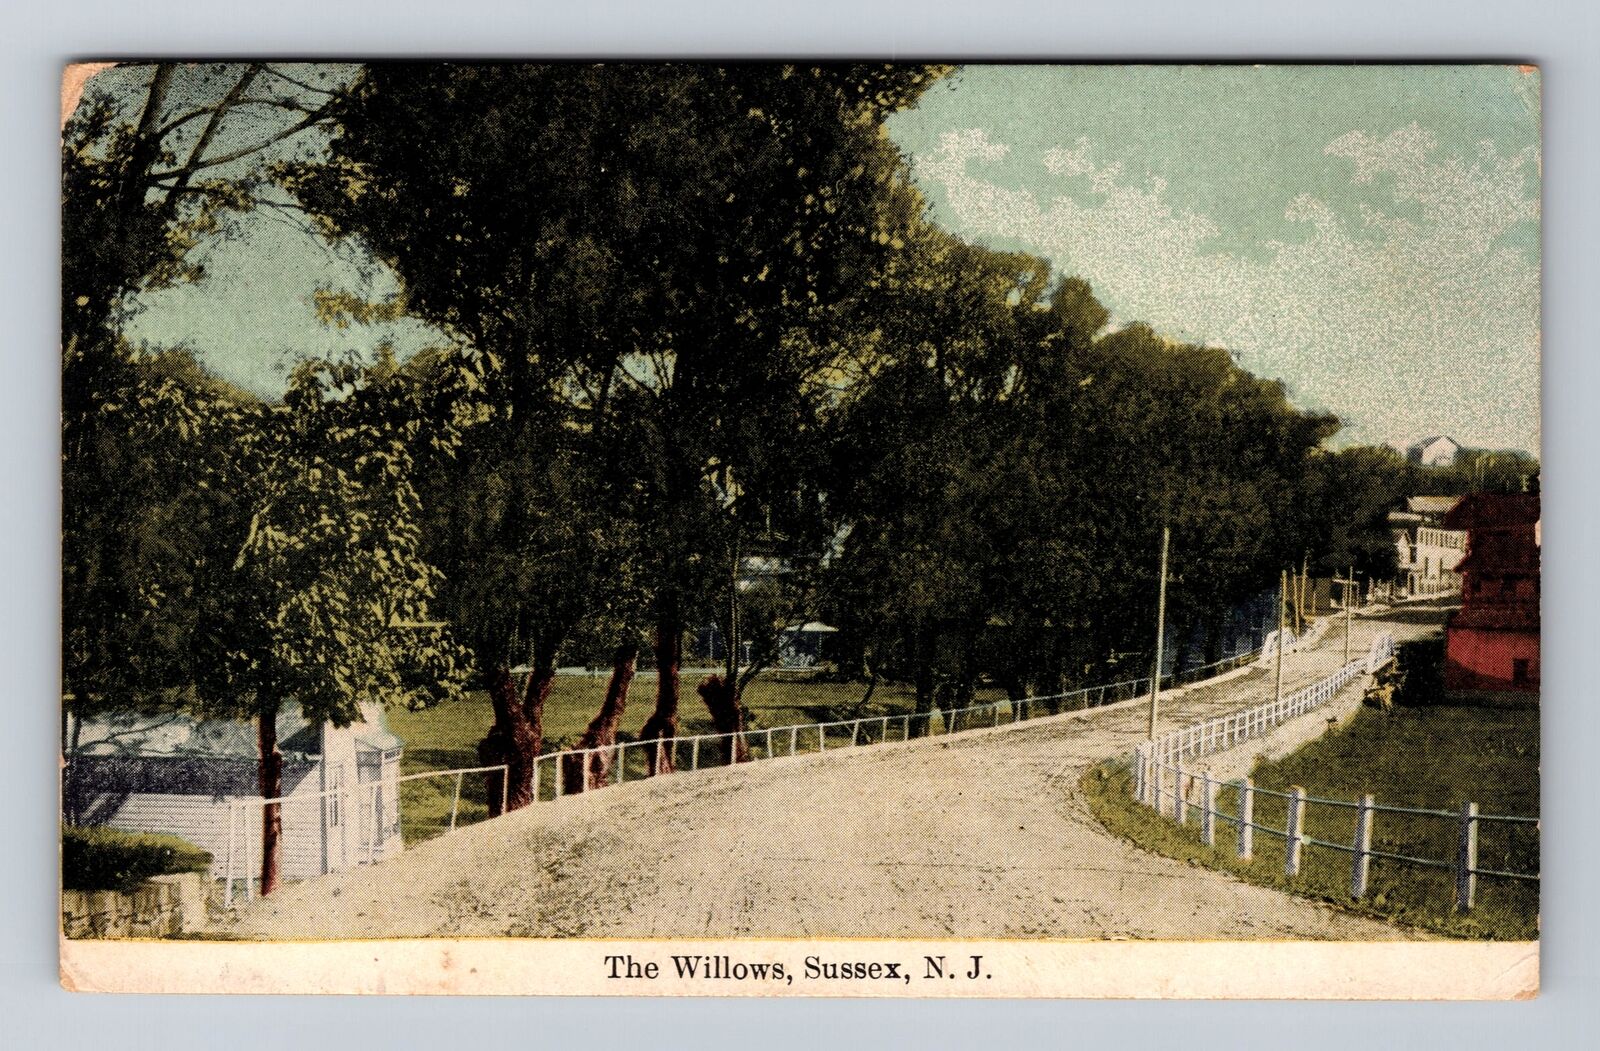 Sussex NJ-New Jersey, The Willows Scenic View Antique, Vintage c1911 Postcard